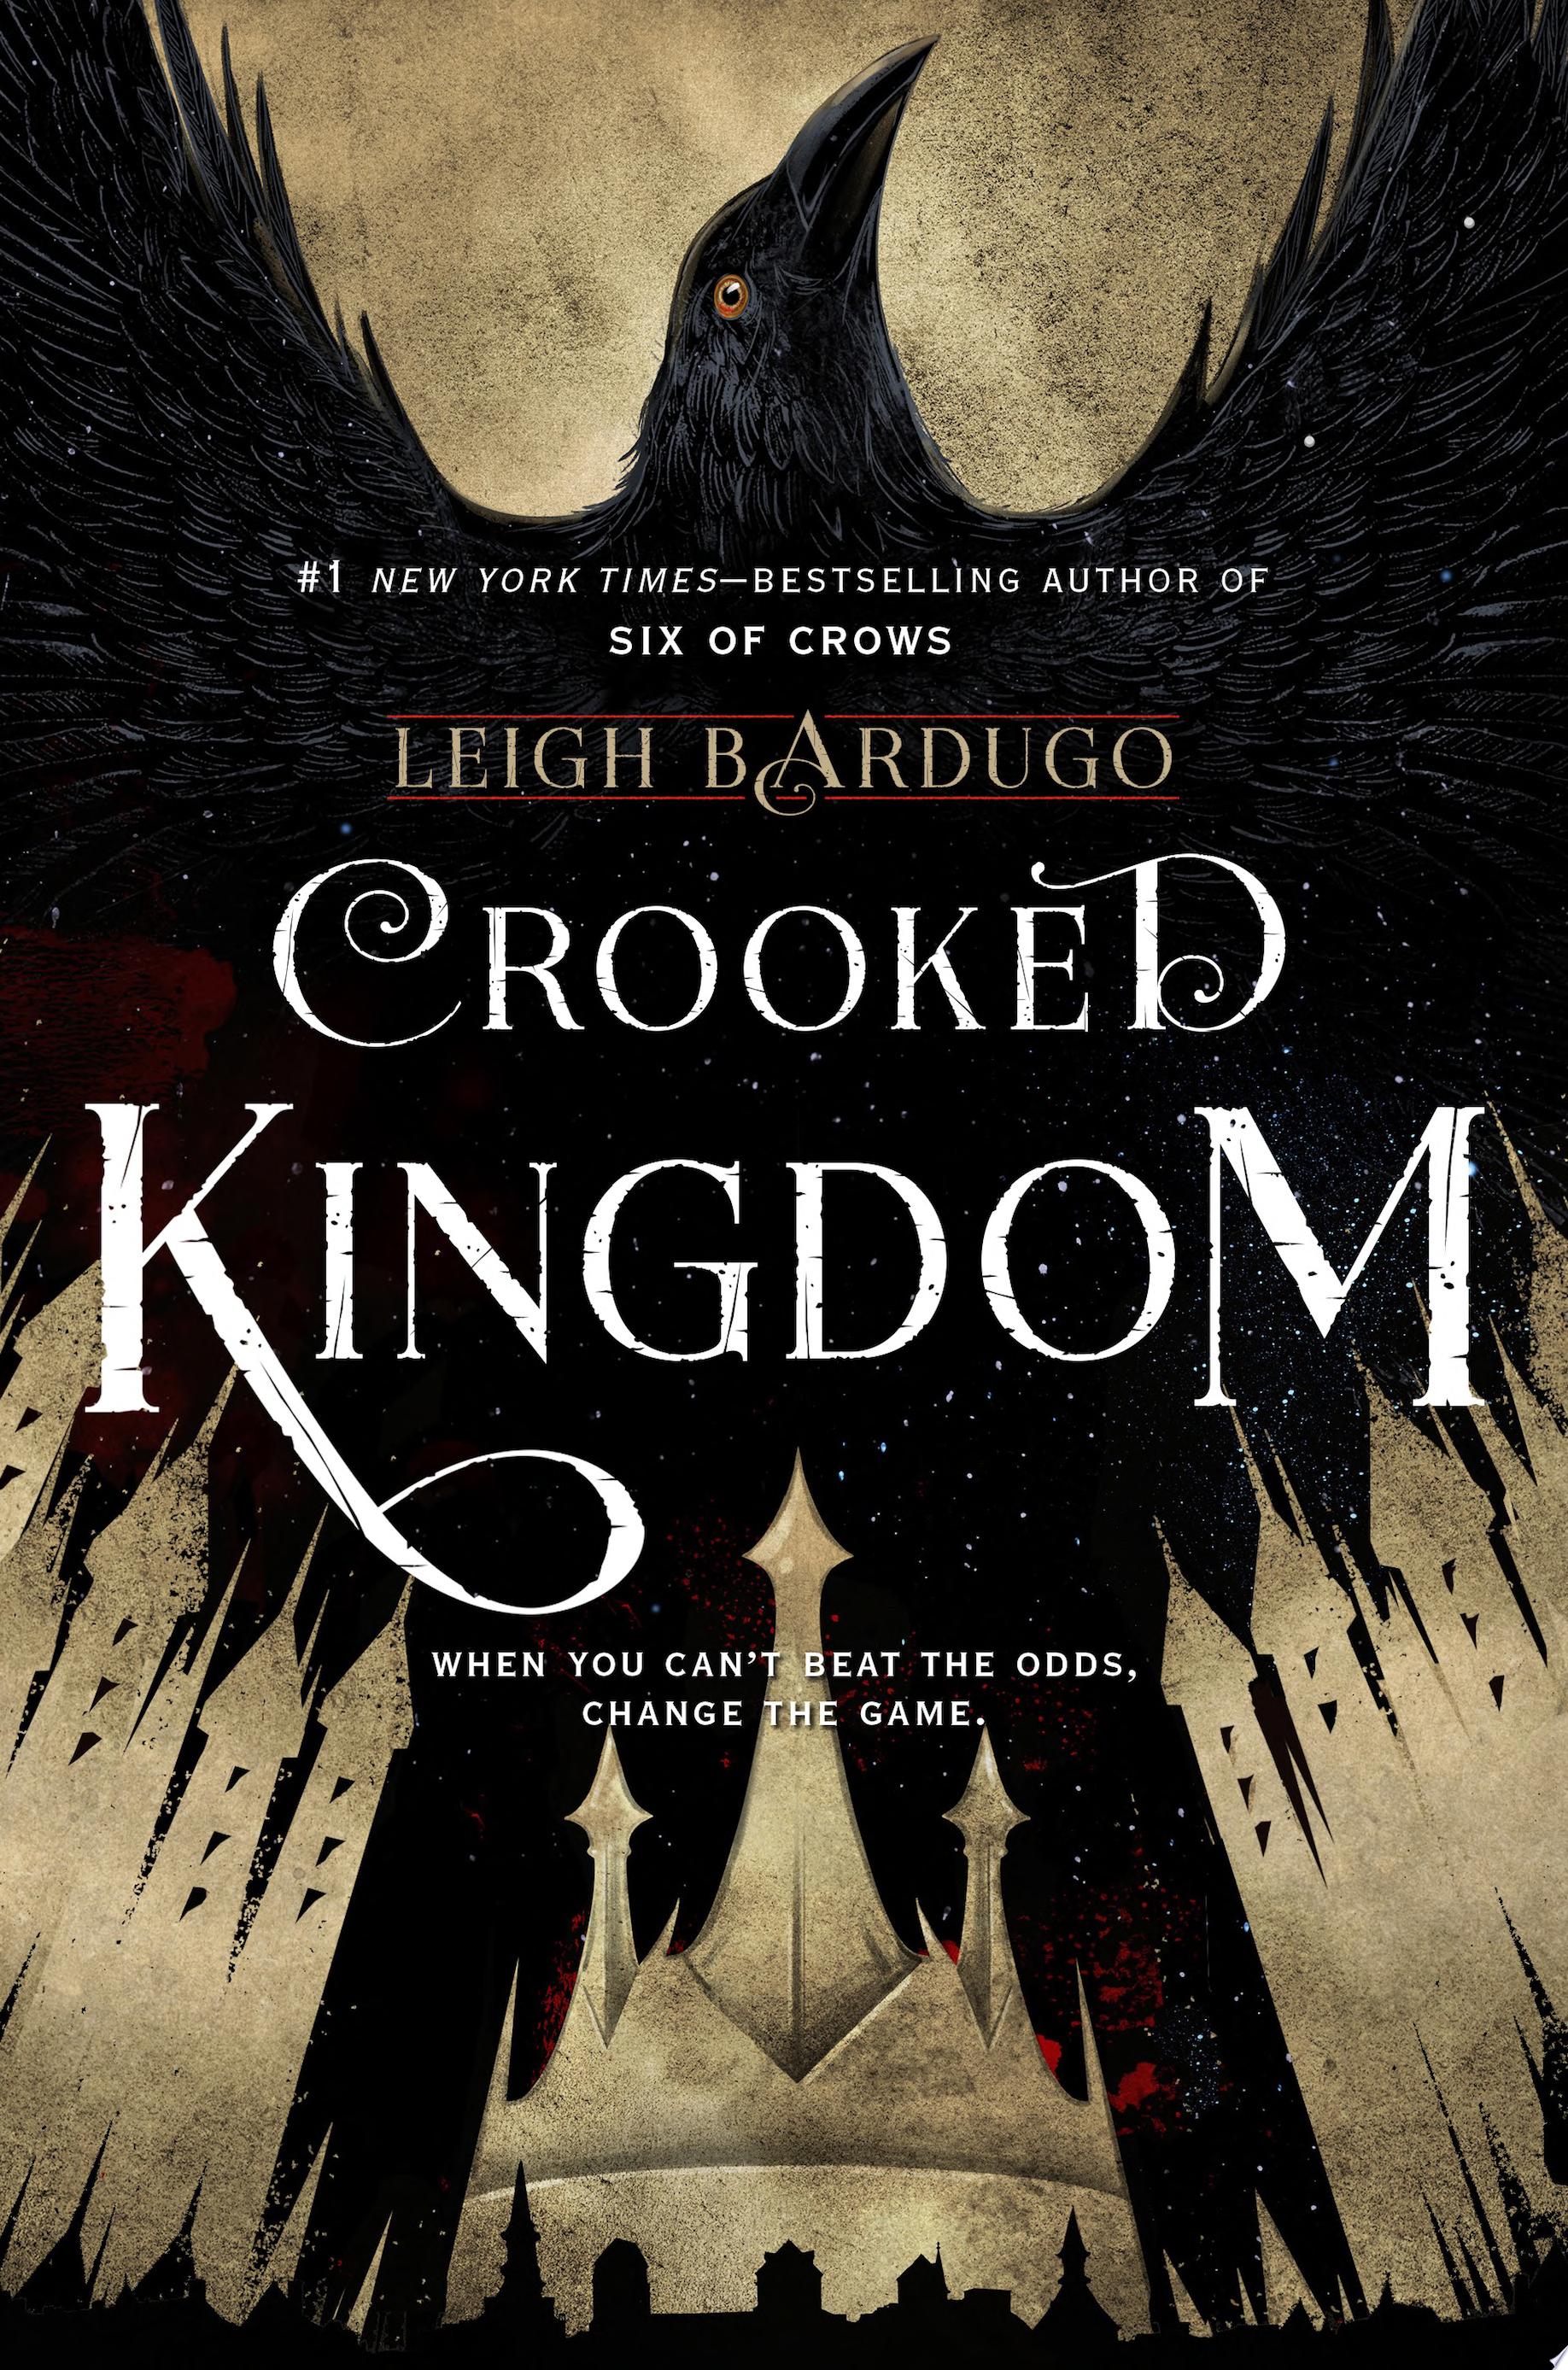 Image for "Crooked Kingdom"